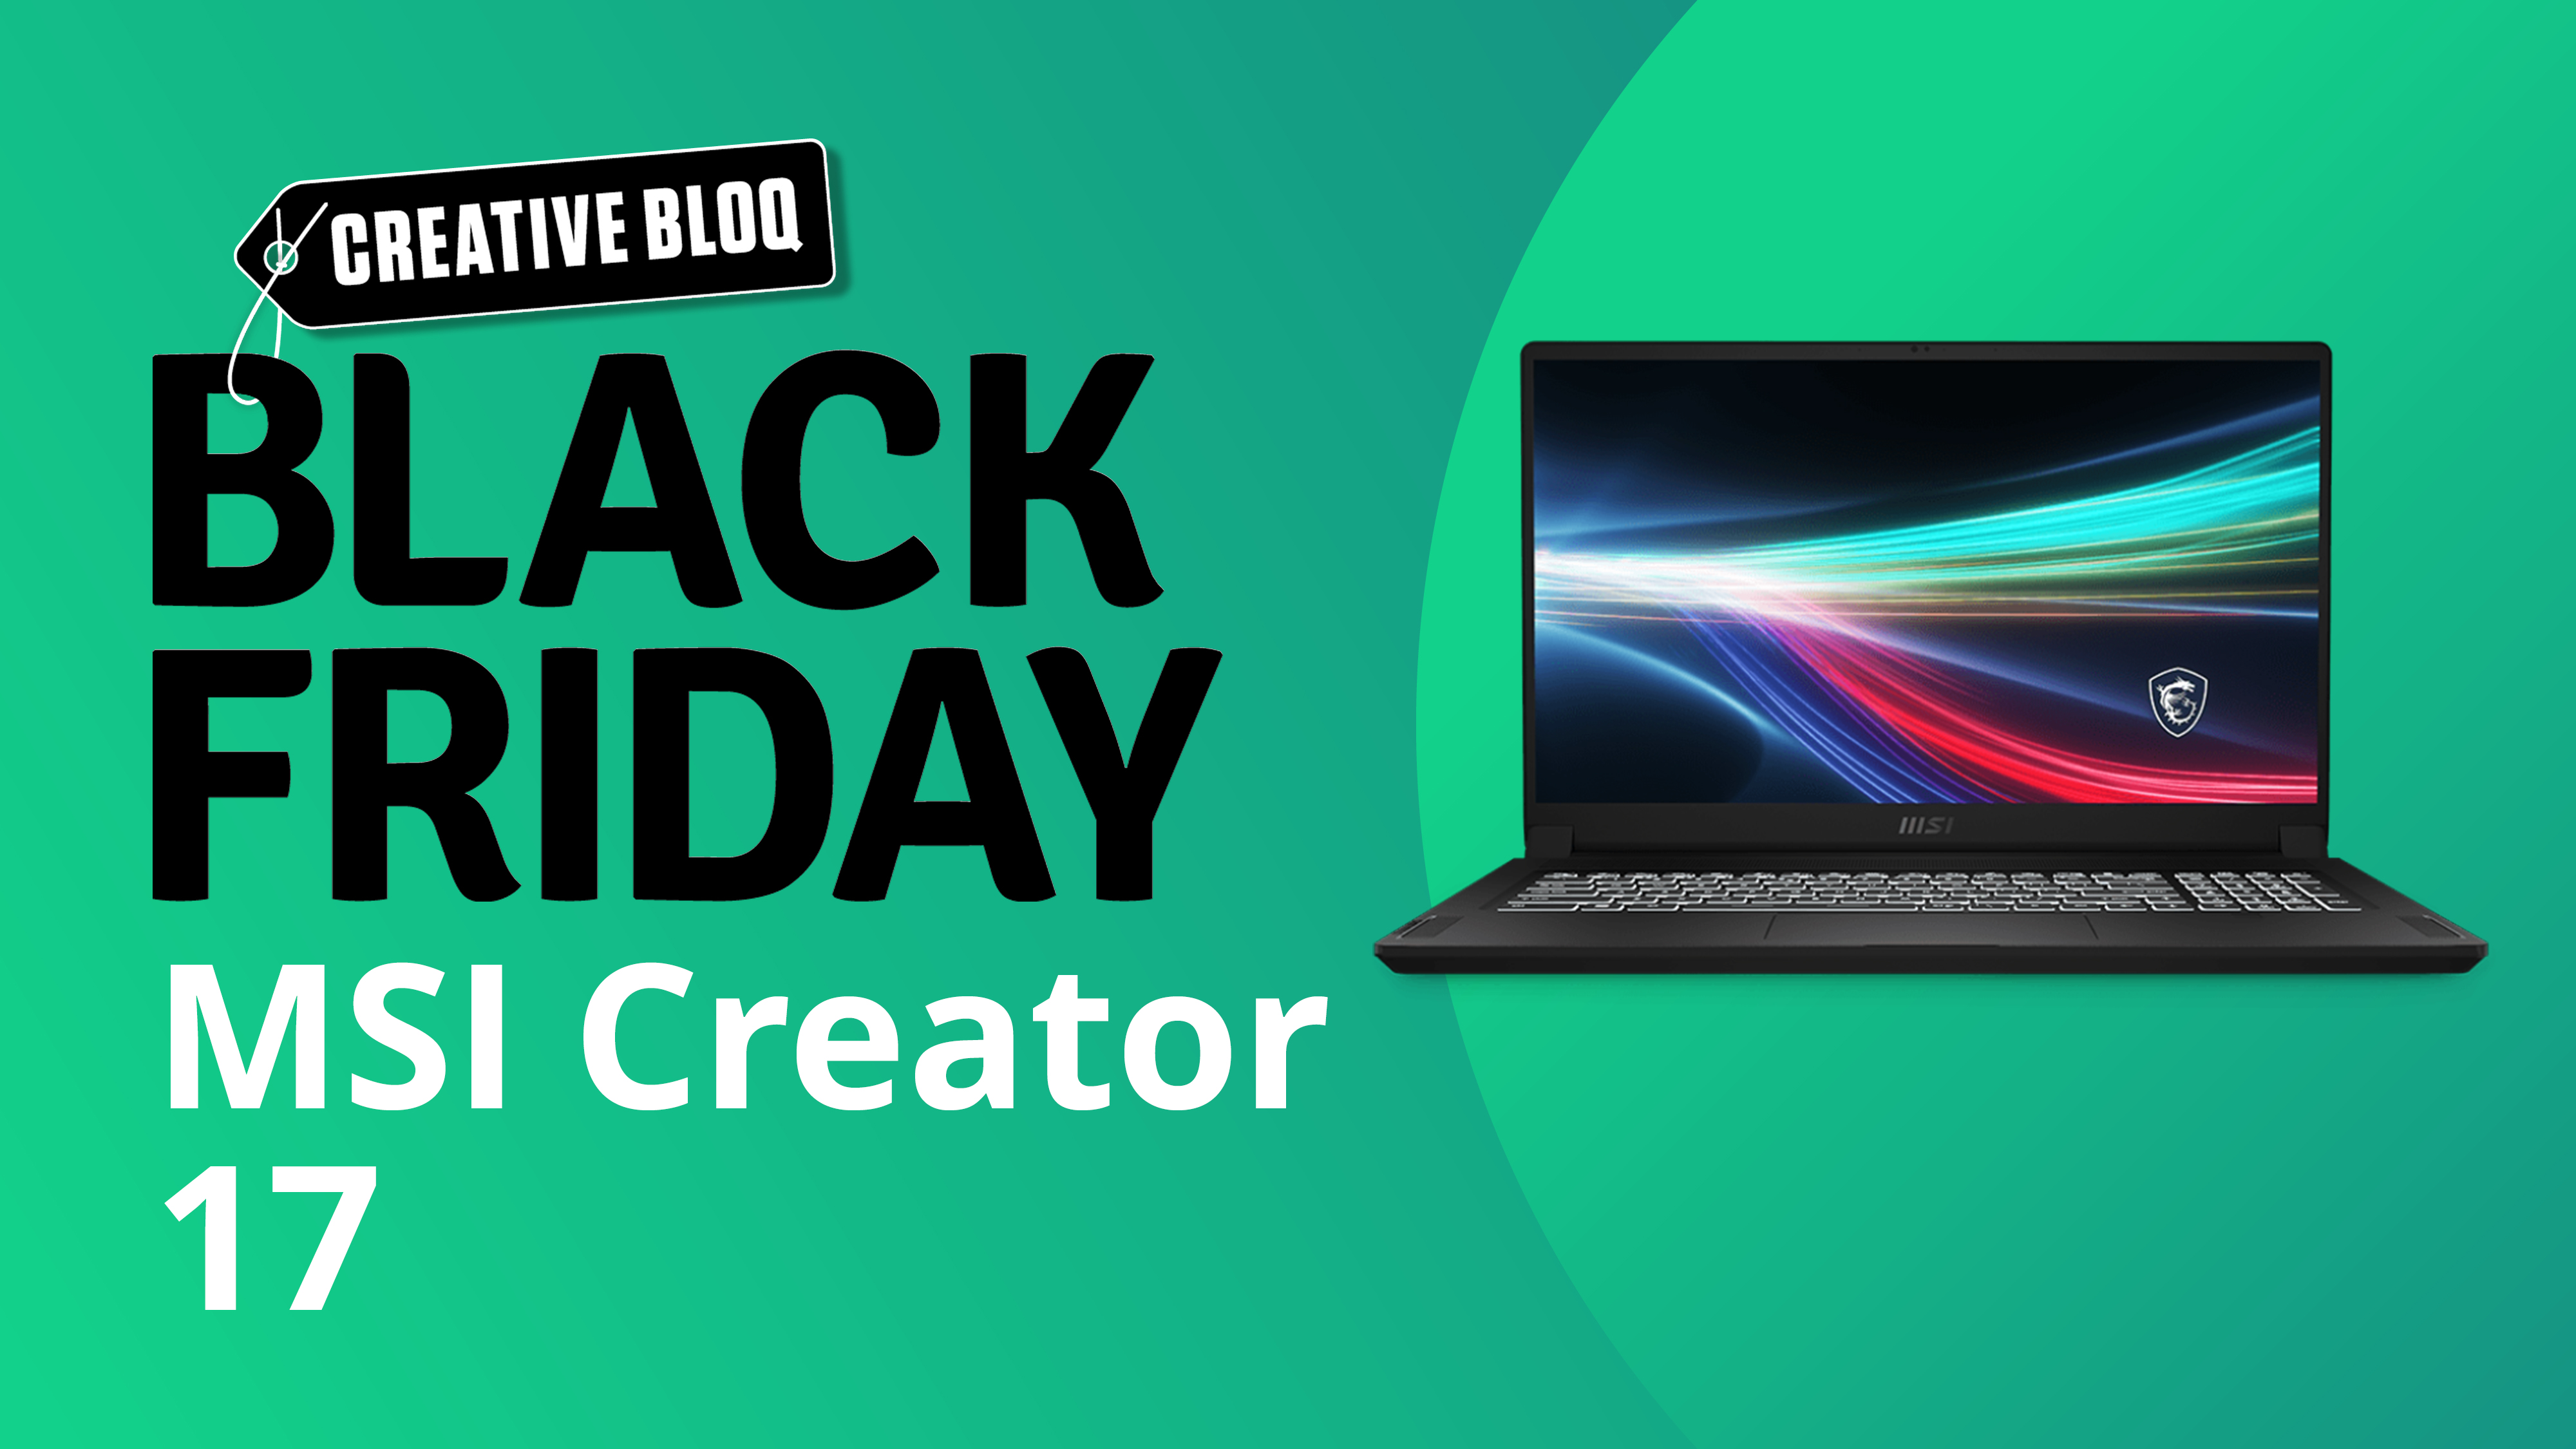 A Black Friday laptop deals image with the text Creative Bloq Black Friday MSI Creator 17 next to an image of a laptop on a green background